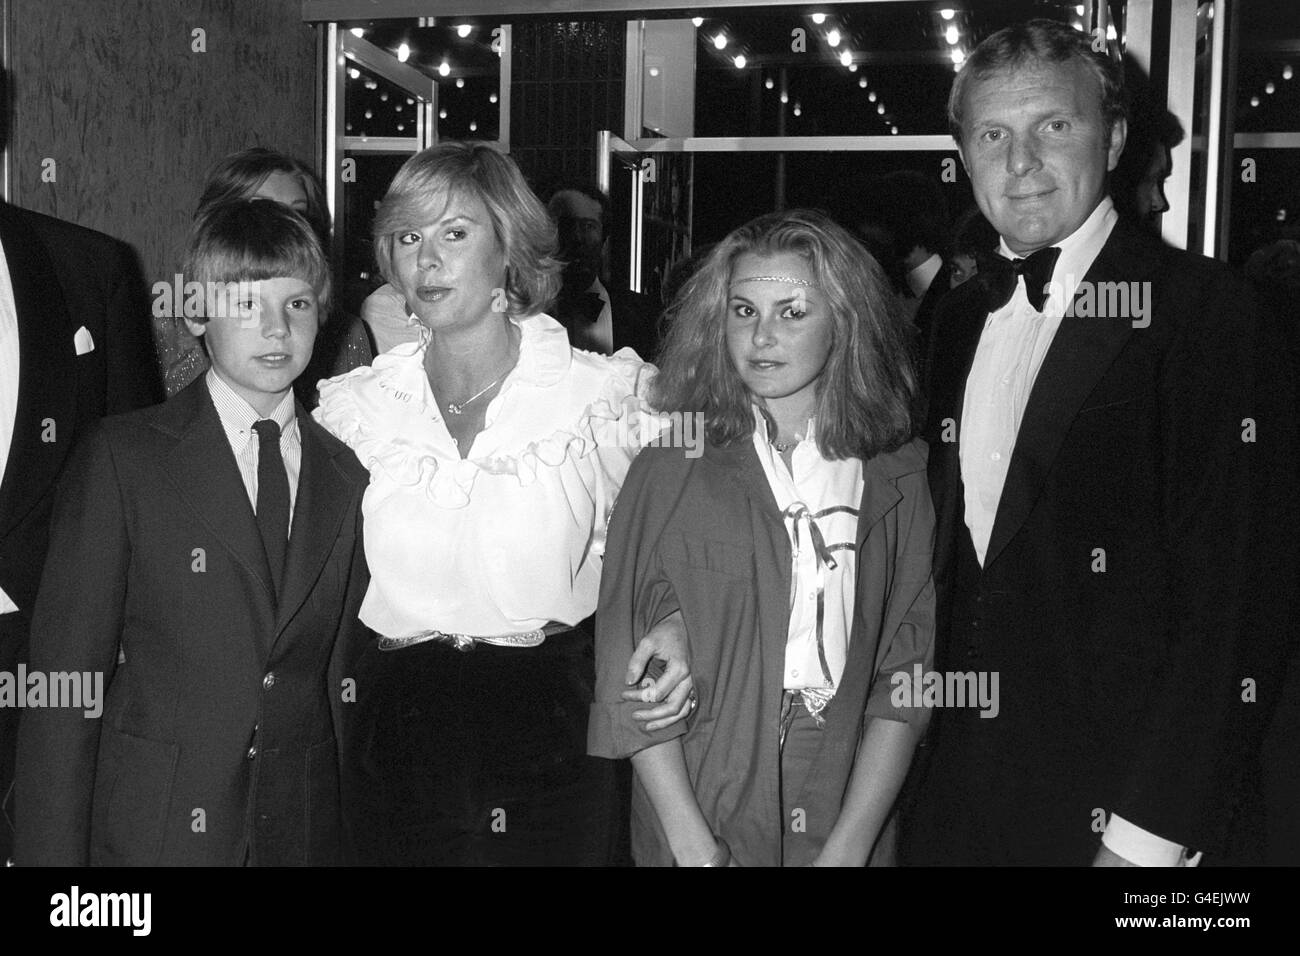 Former Footballer For West Ham United And England World Cup Winning Captain Bobby Moore R With His Family At The Charity Premiere For The Film Escape To Victory L R Dean Tina And